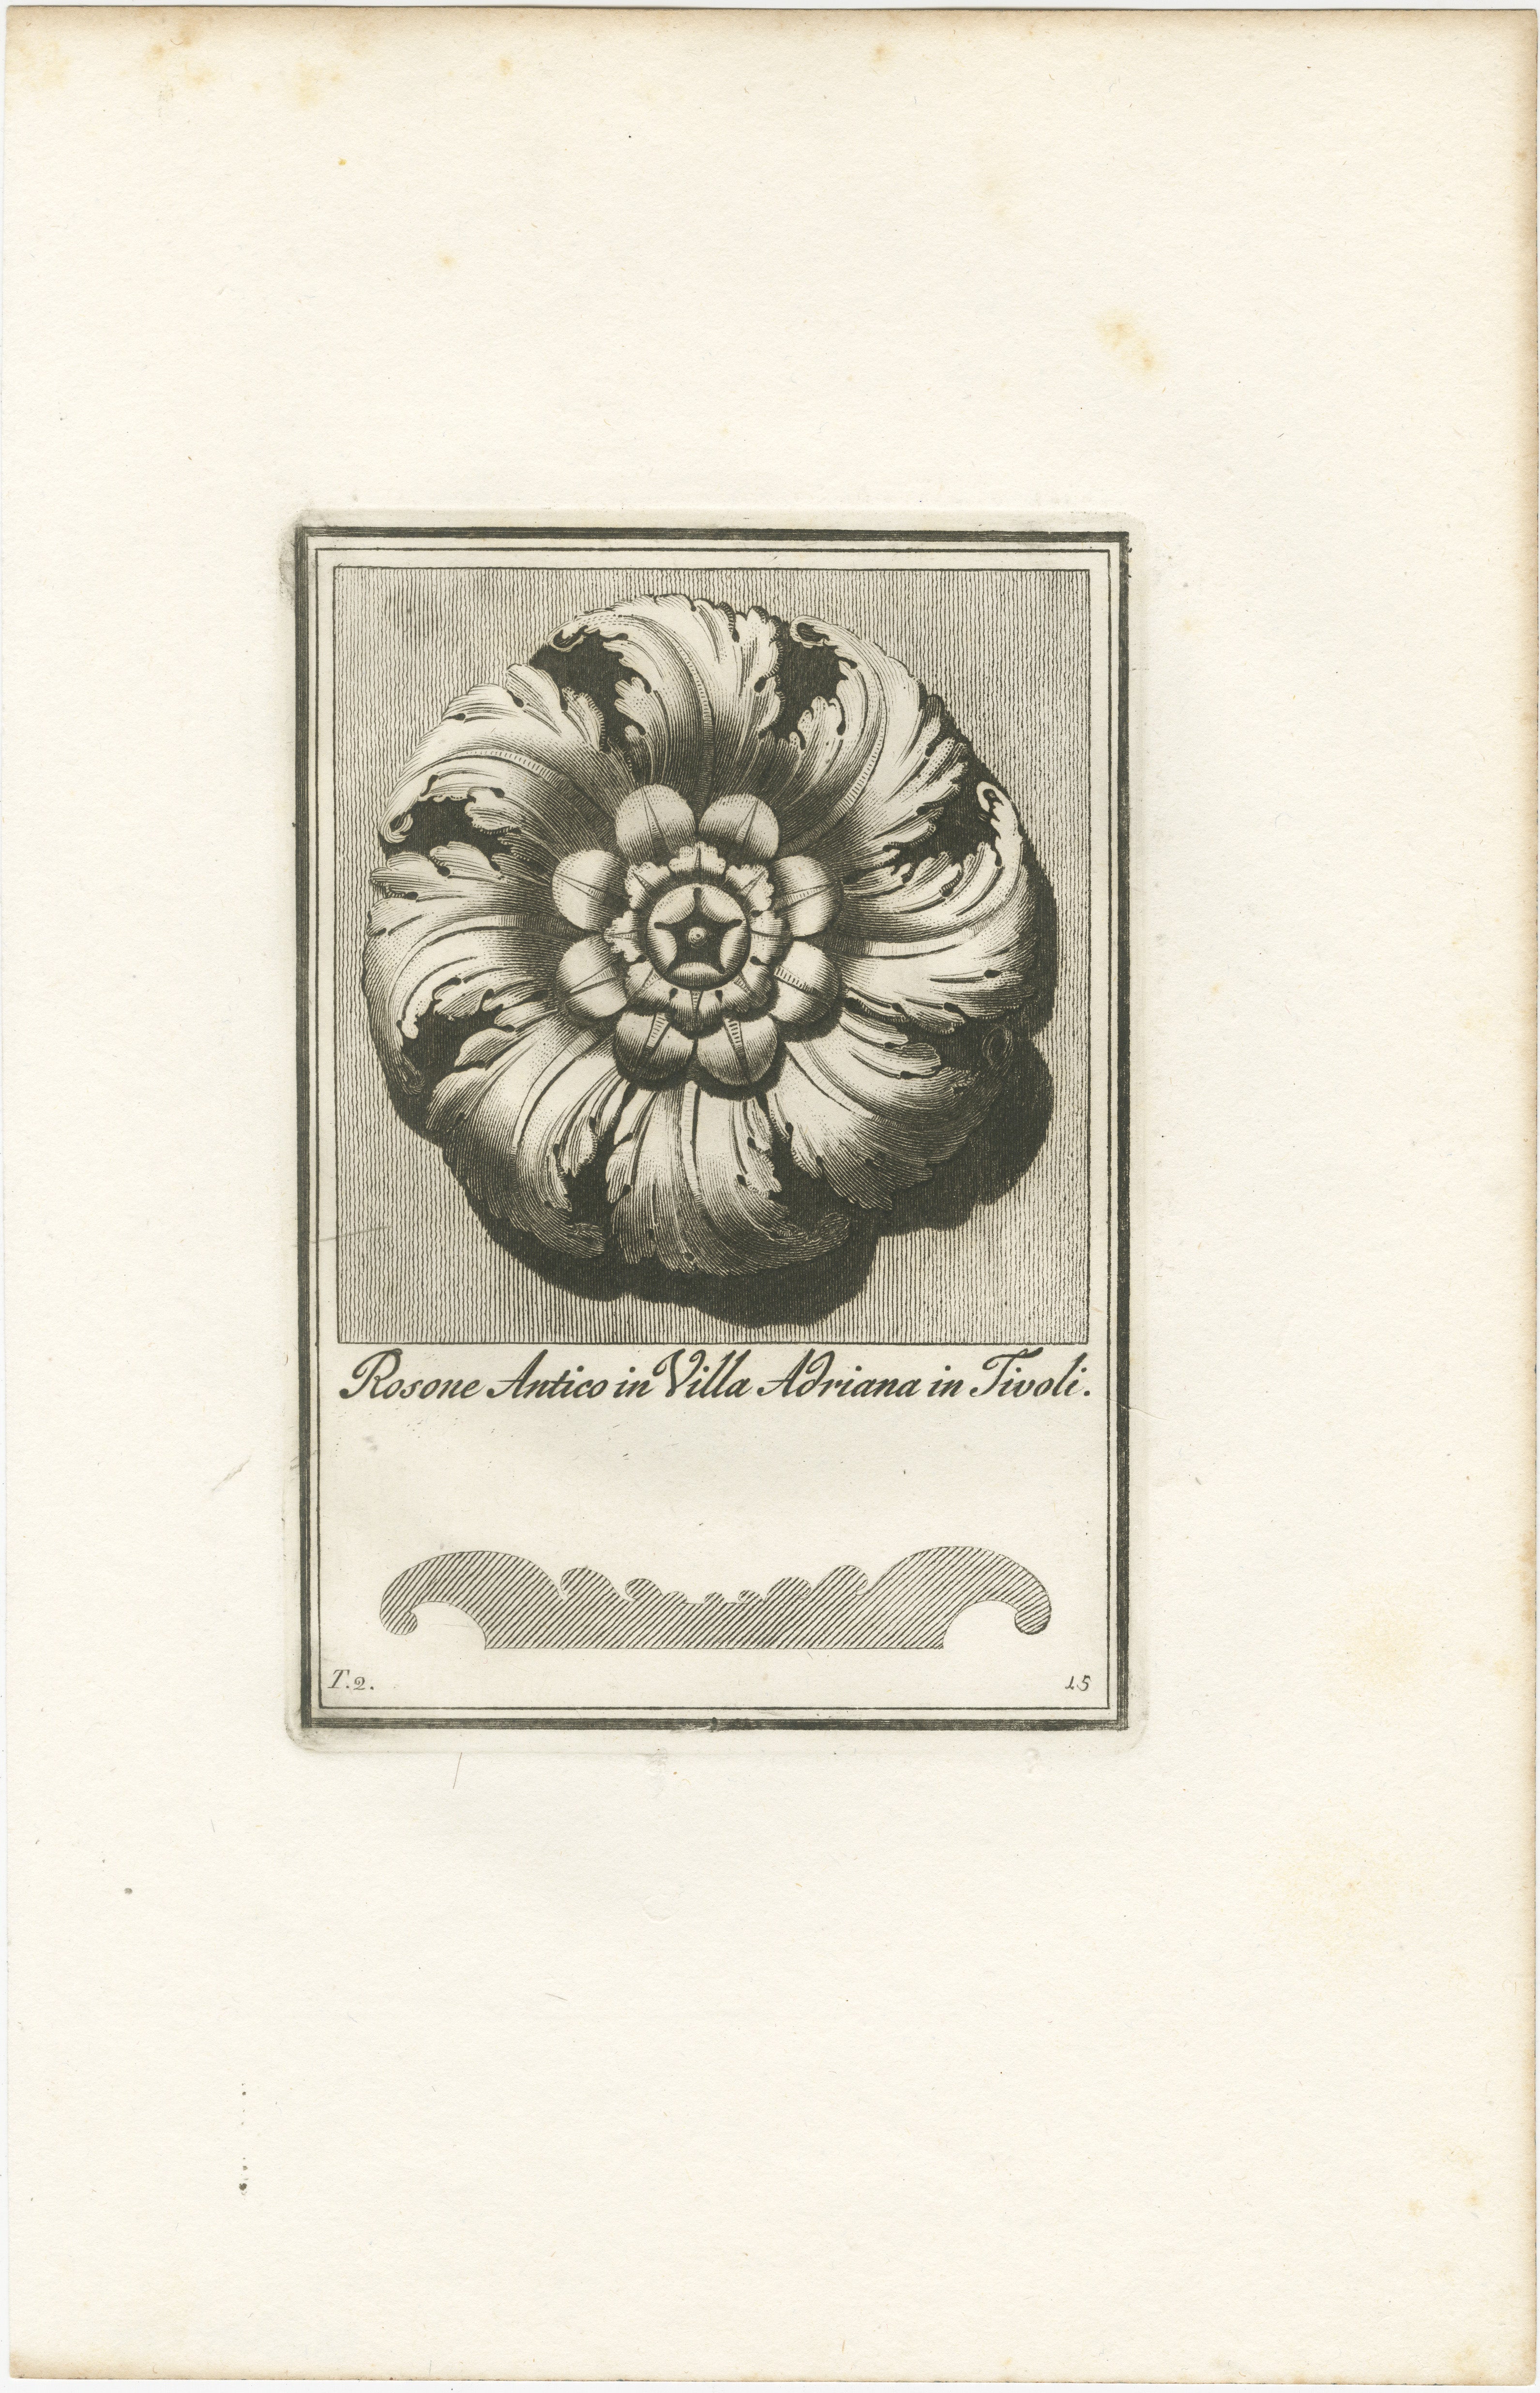 This elegant engraving from the late 18th century features a rosette, an ornamental design resembling a stylized rose, which has been a recurring motif in architectural design through the ages. 

Title: 